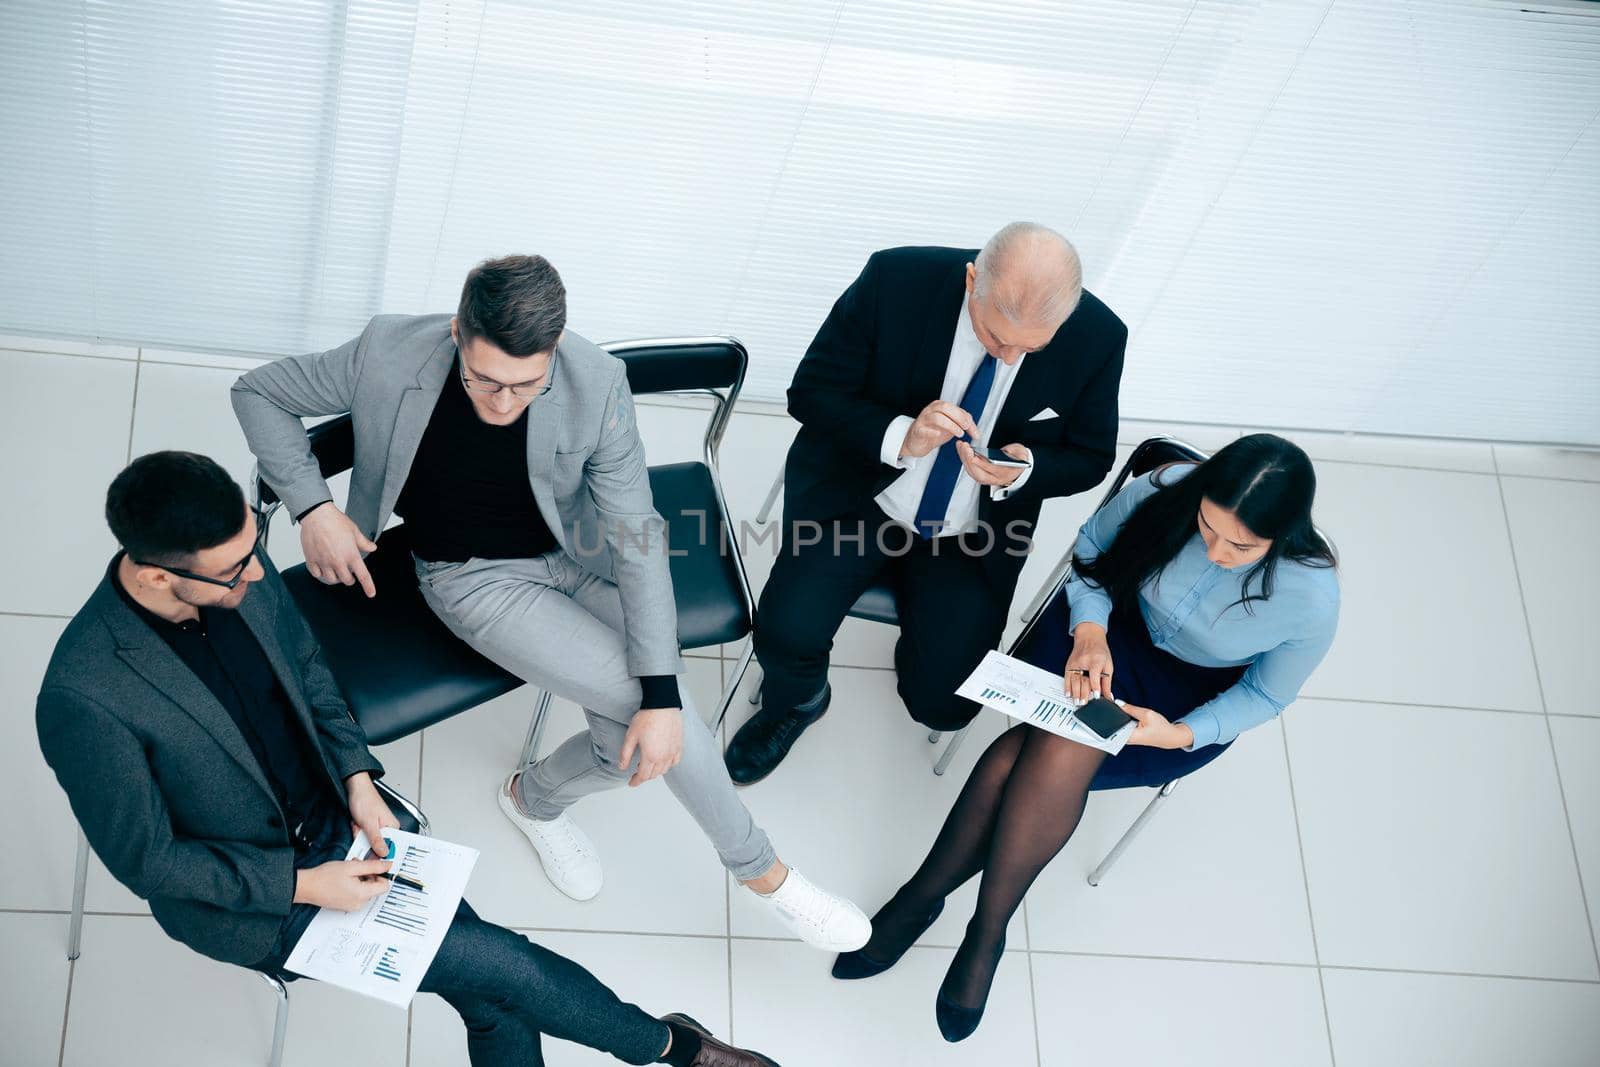 top view. businessman using a smartphone during a work meeting. photo with copy-space